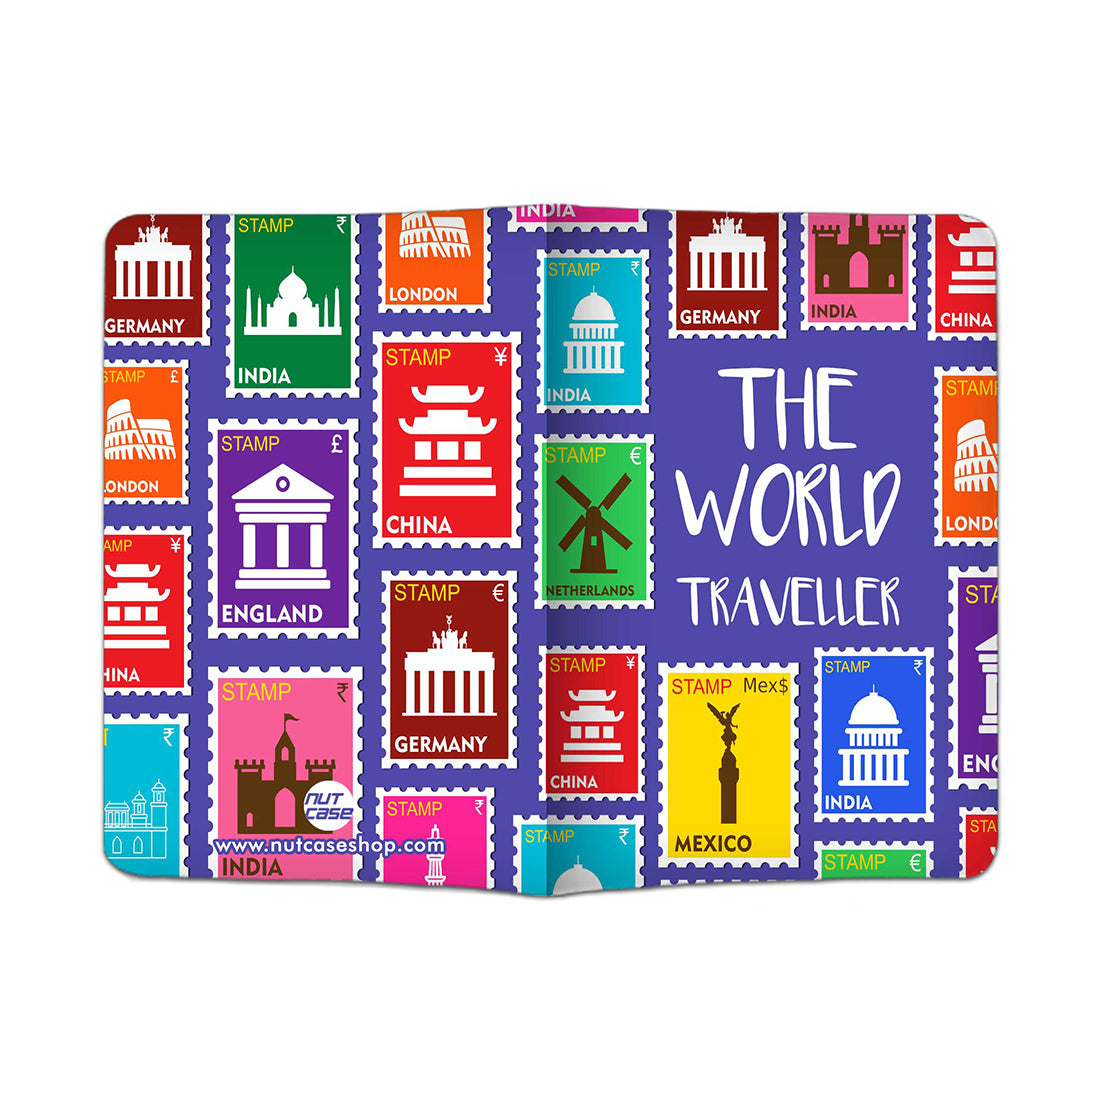 Passport Cover Holder Travel Case With Luggage Tag - The World Traveller Blue Nutcase